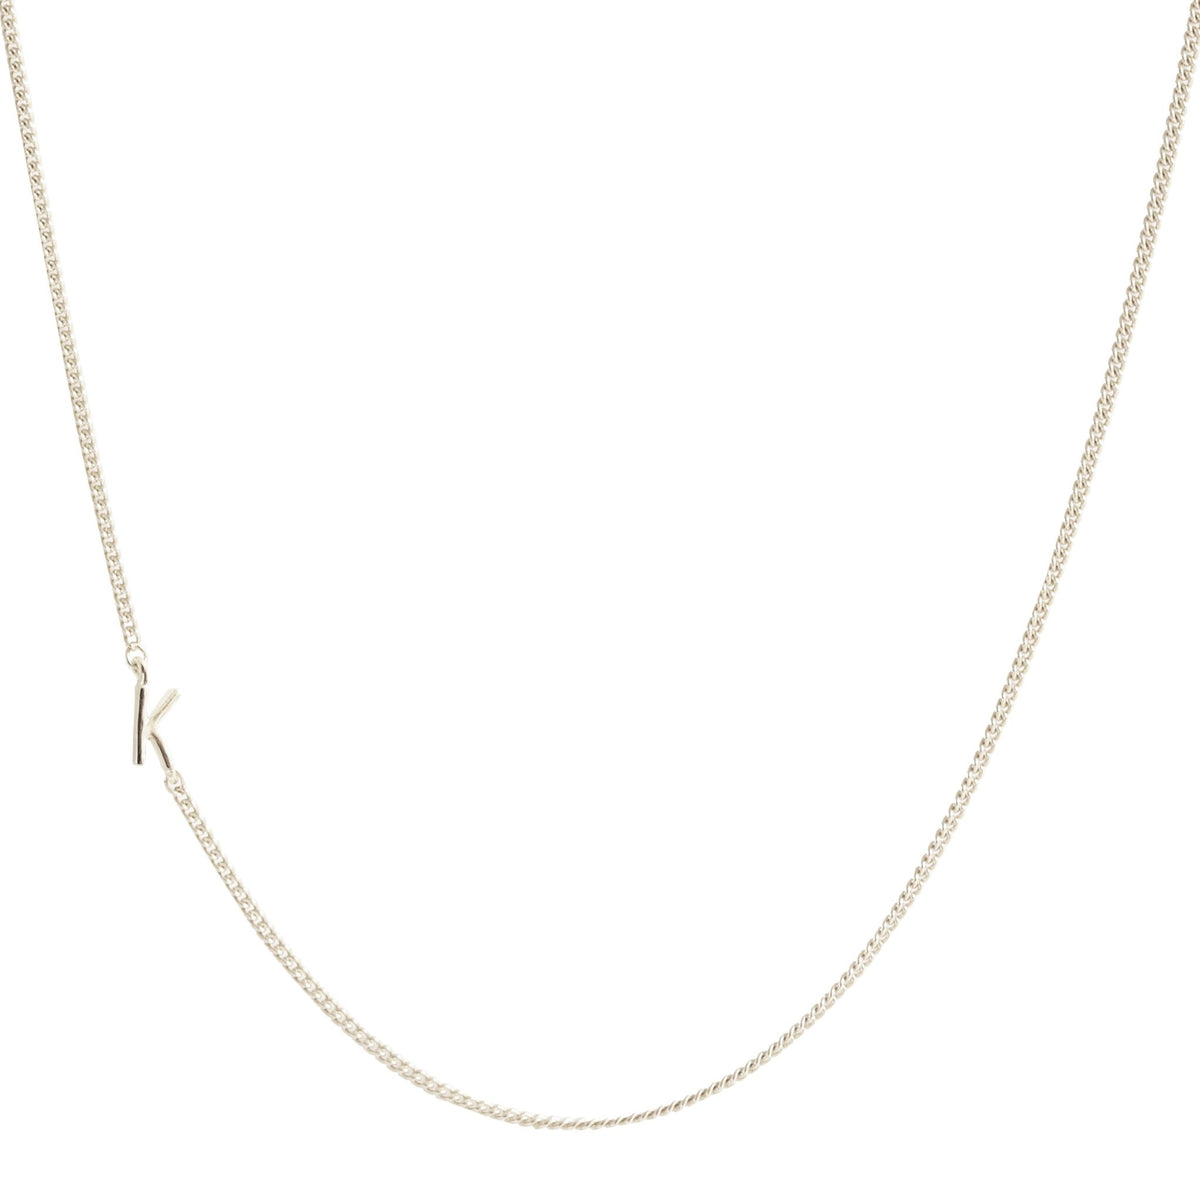 NOTABLE OFFSET INITIAL NECKLACE - K - GOLD, ROSE GOLD, OR SILVER - SO PRETTY CARA COTTER